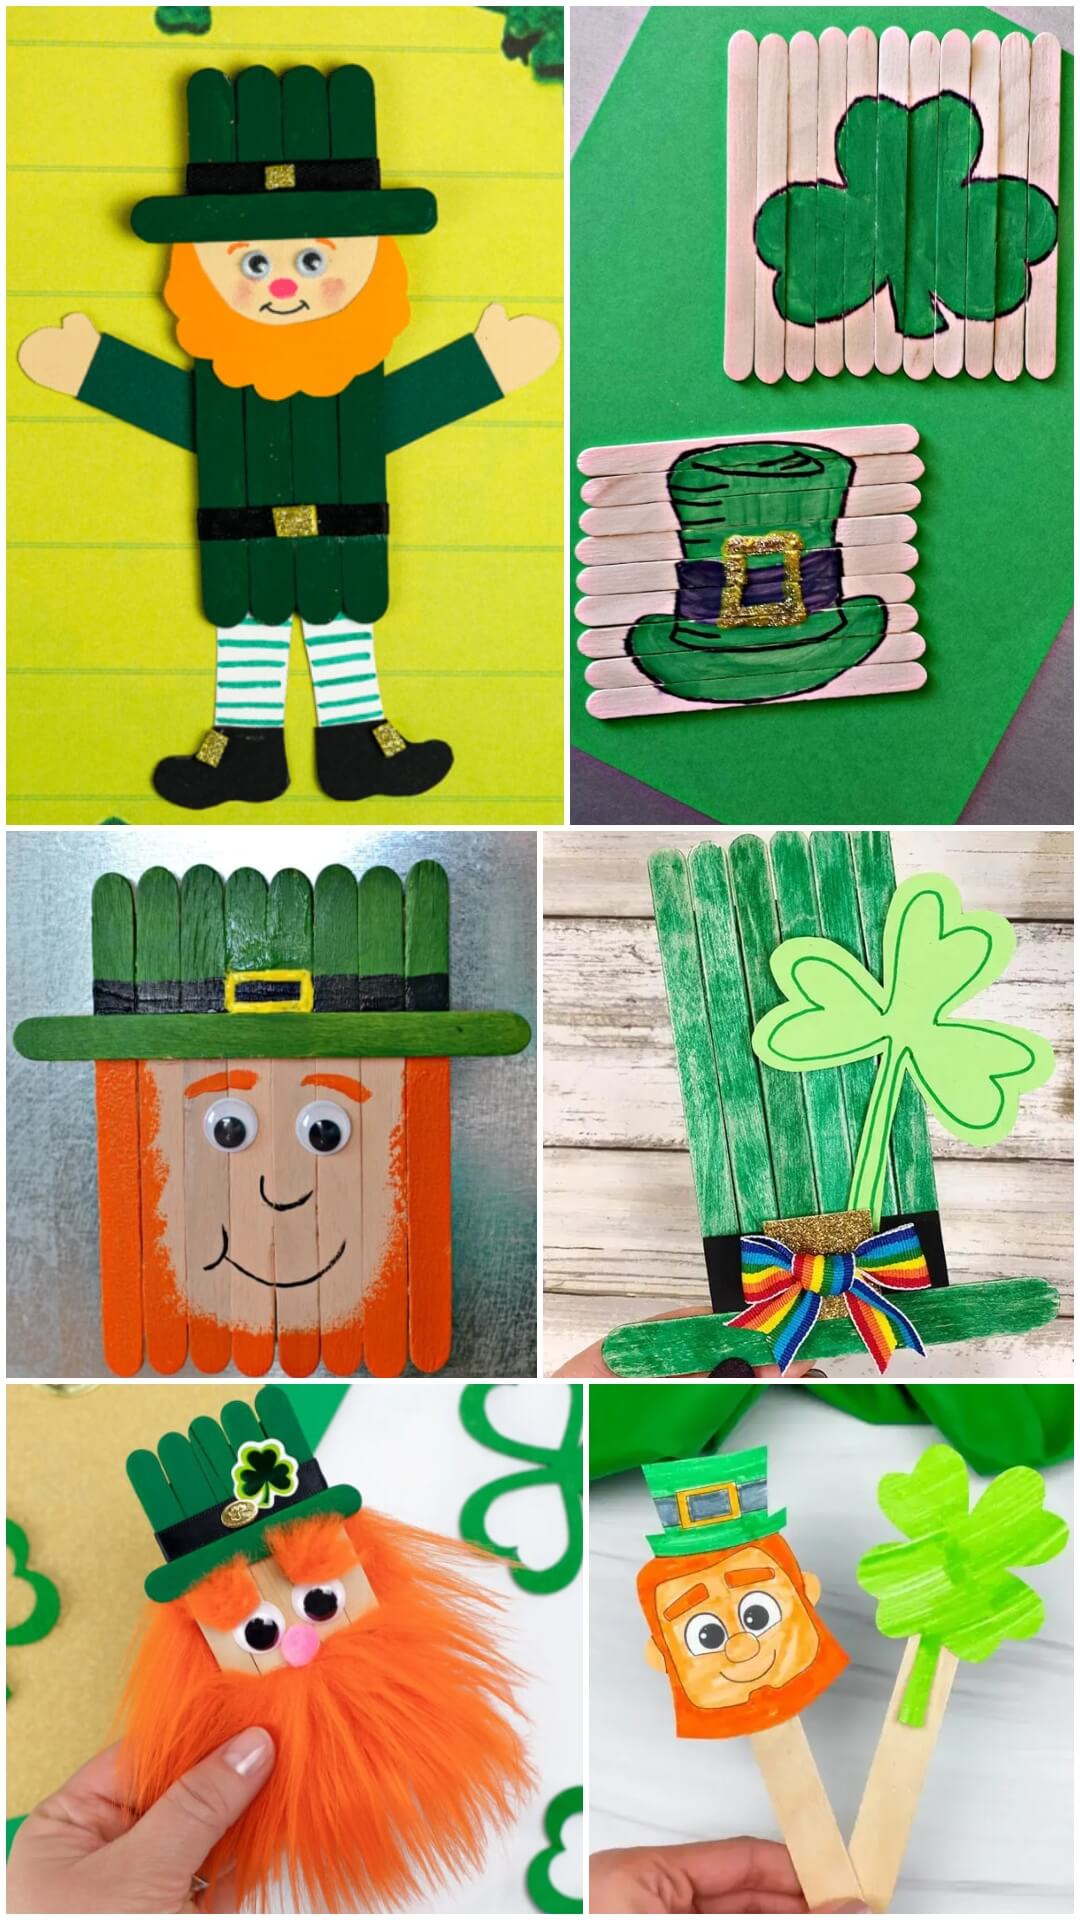 Popsicle Stick Craft Ideas For St. Patrick's Day